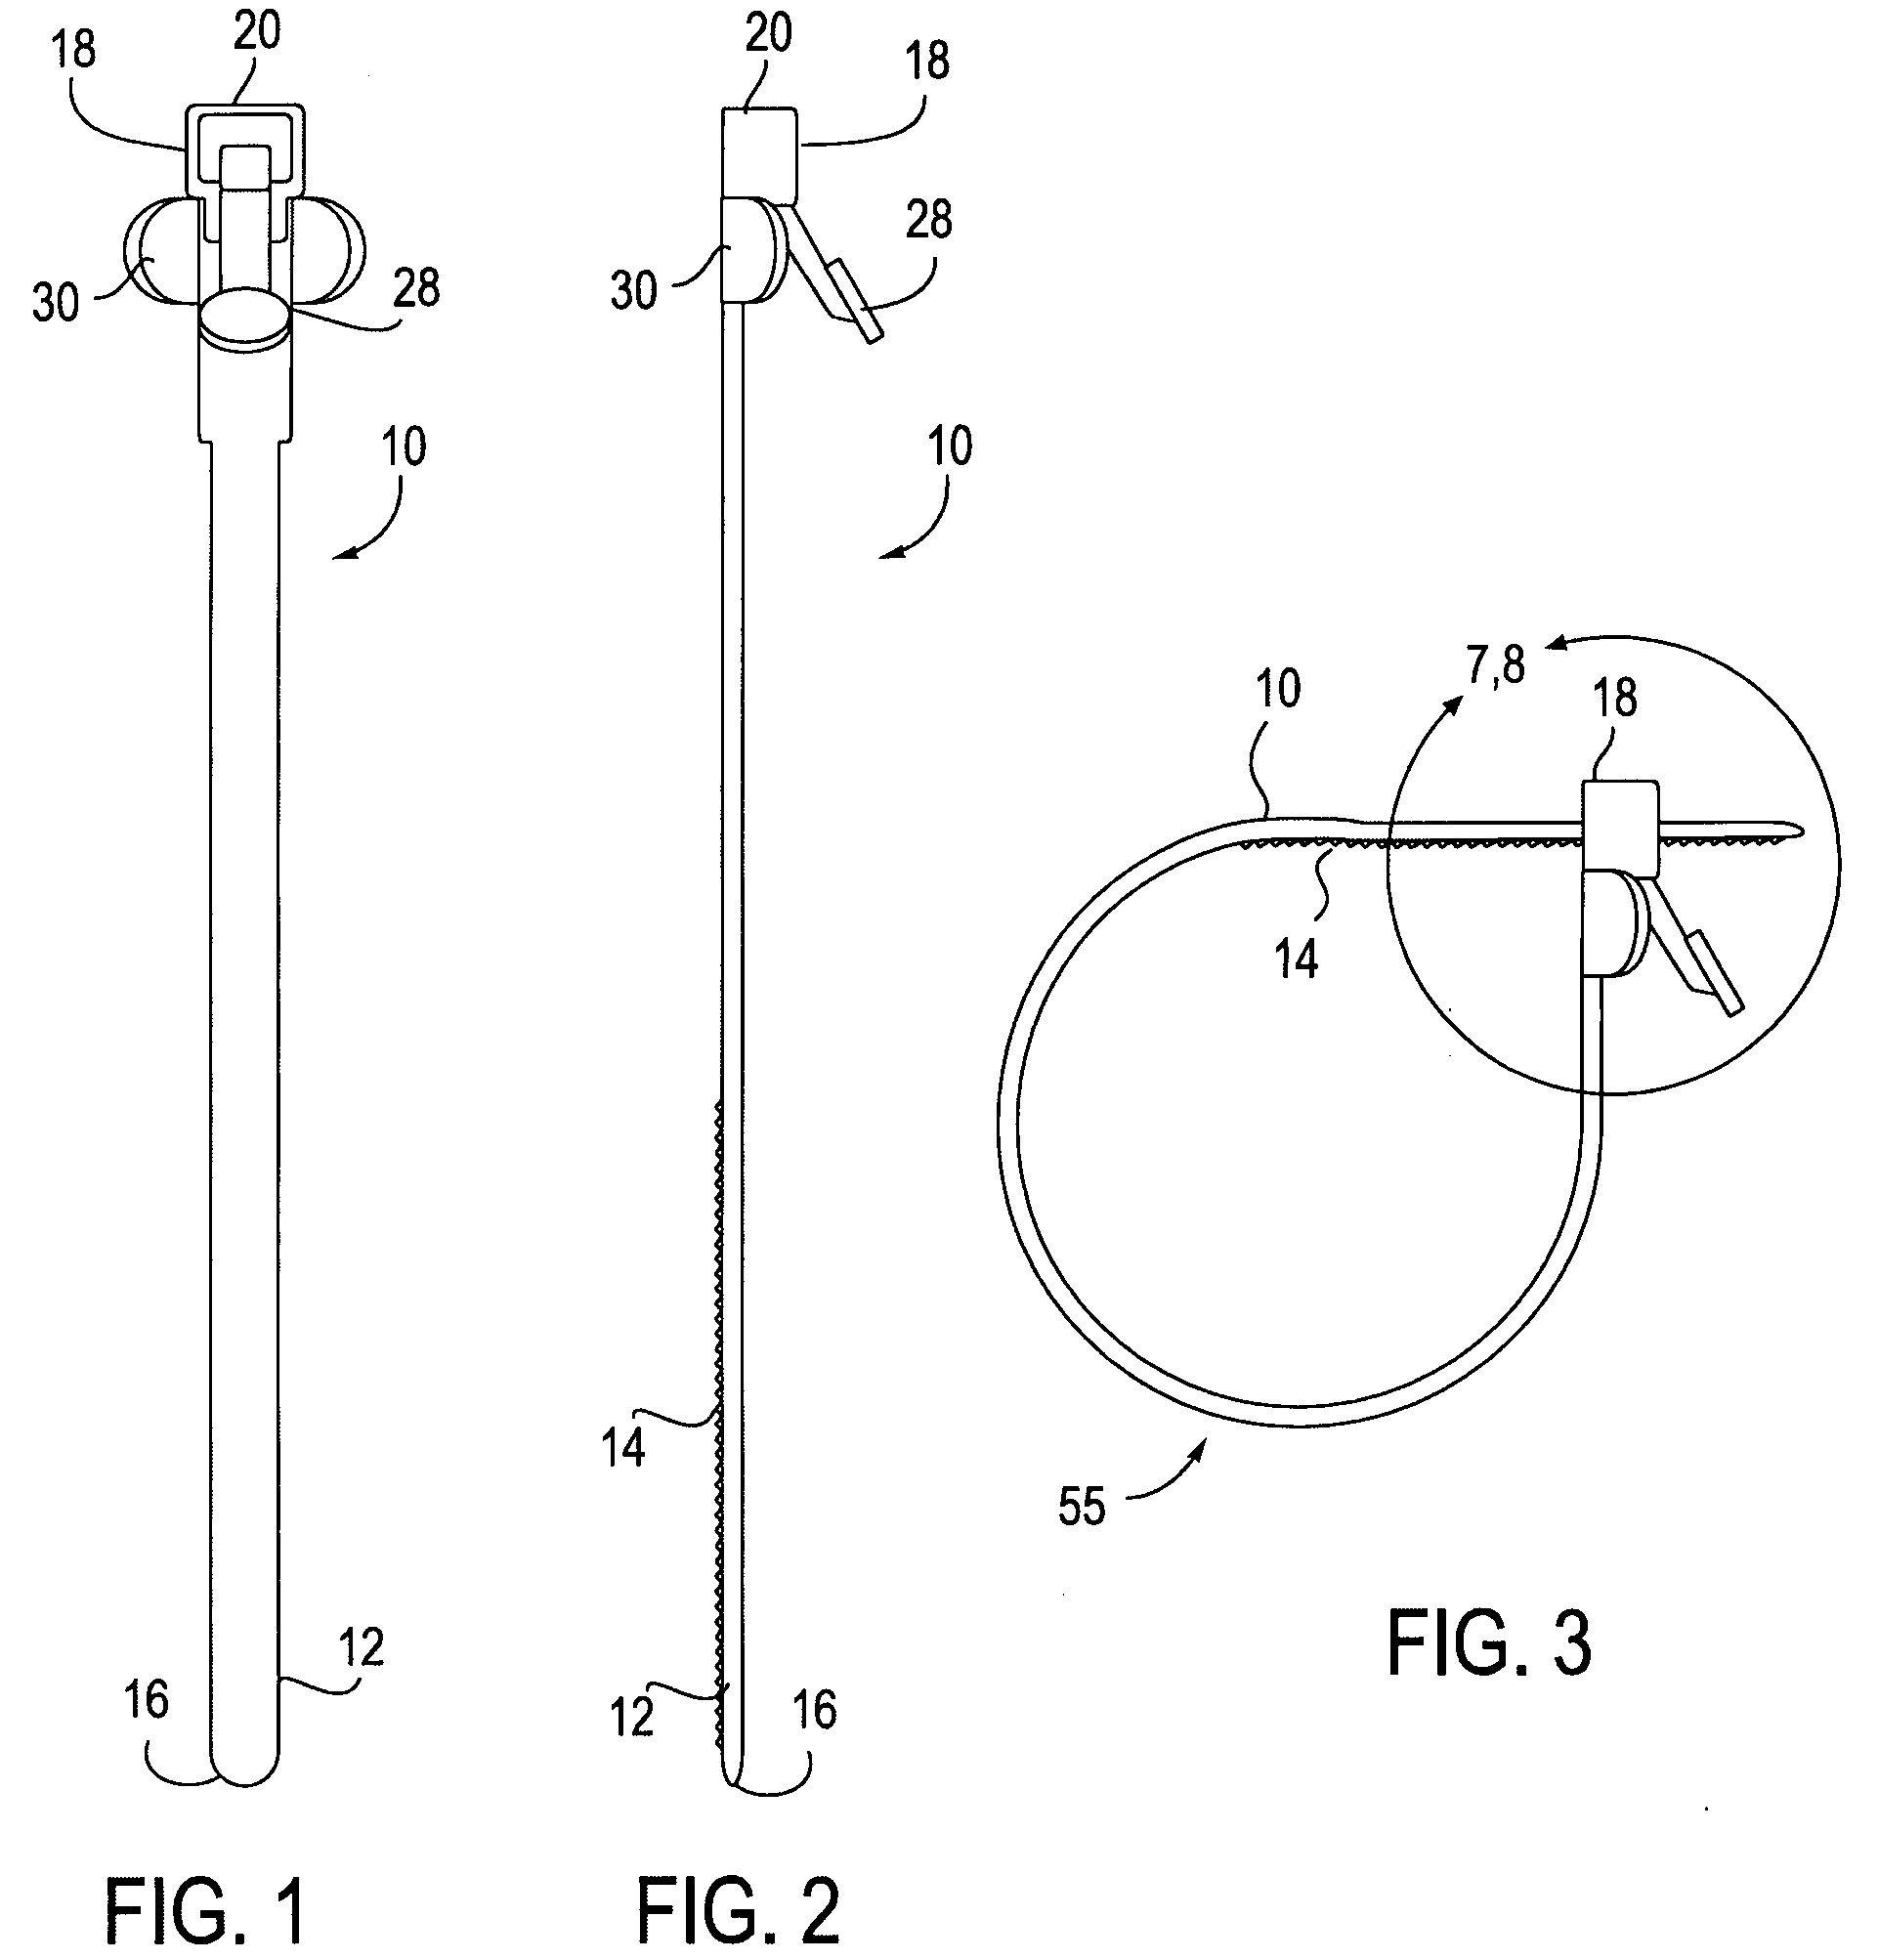 Method and apparatus for restricting blood flow